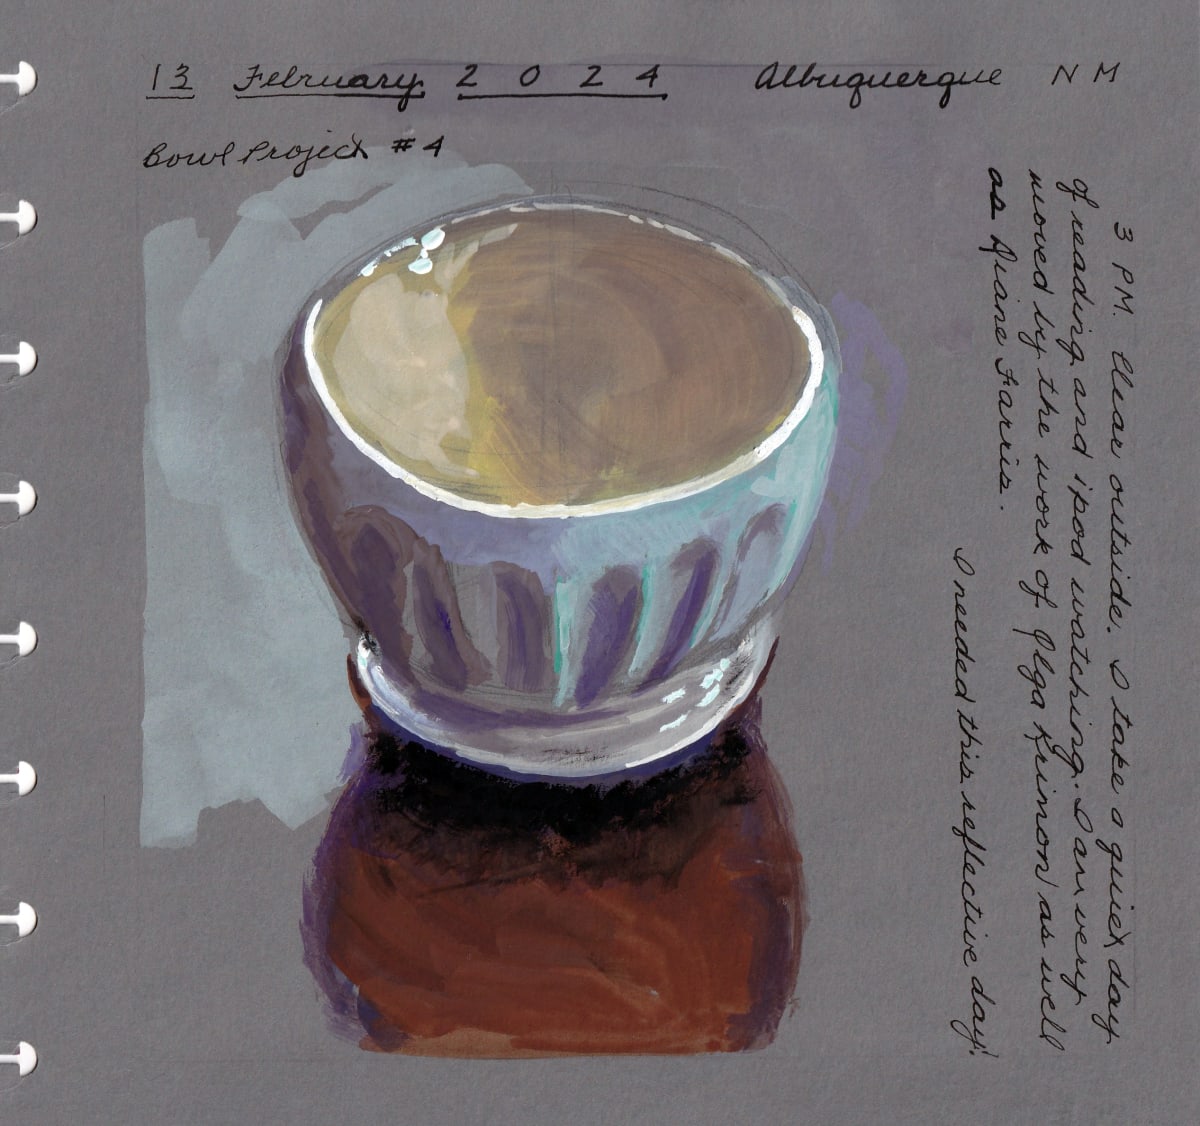 Journey Daybook Page by Margaret Pulis Herrick (Peggy)  Image: Bowl Project #4